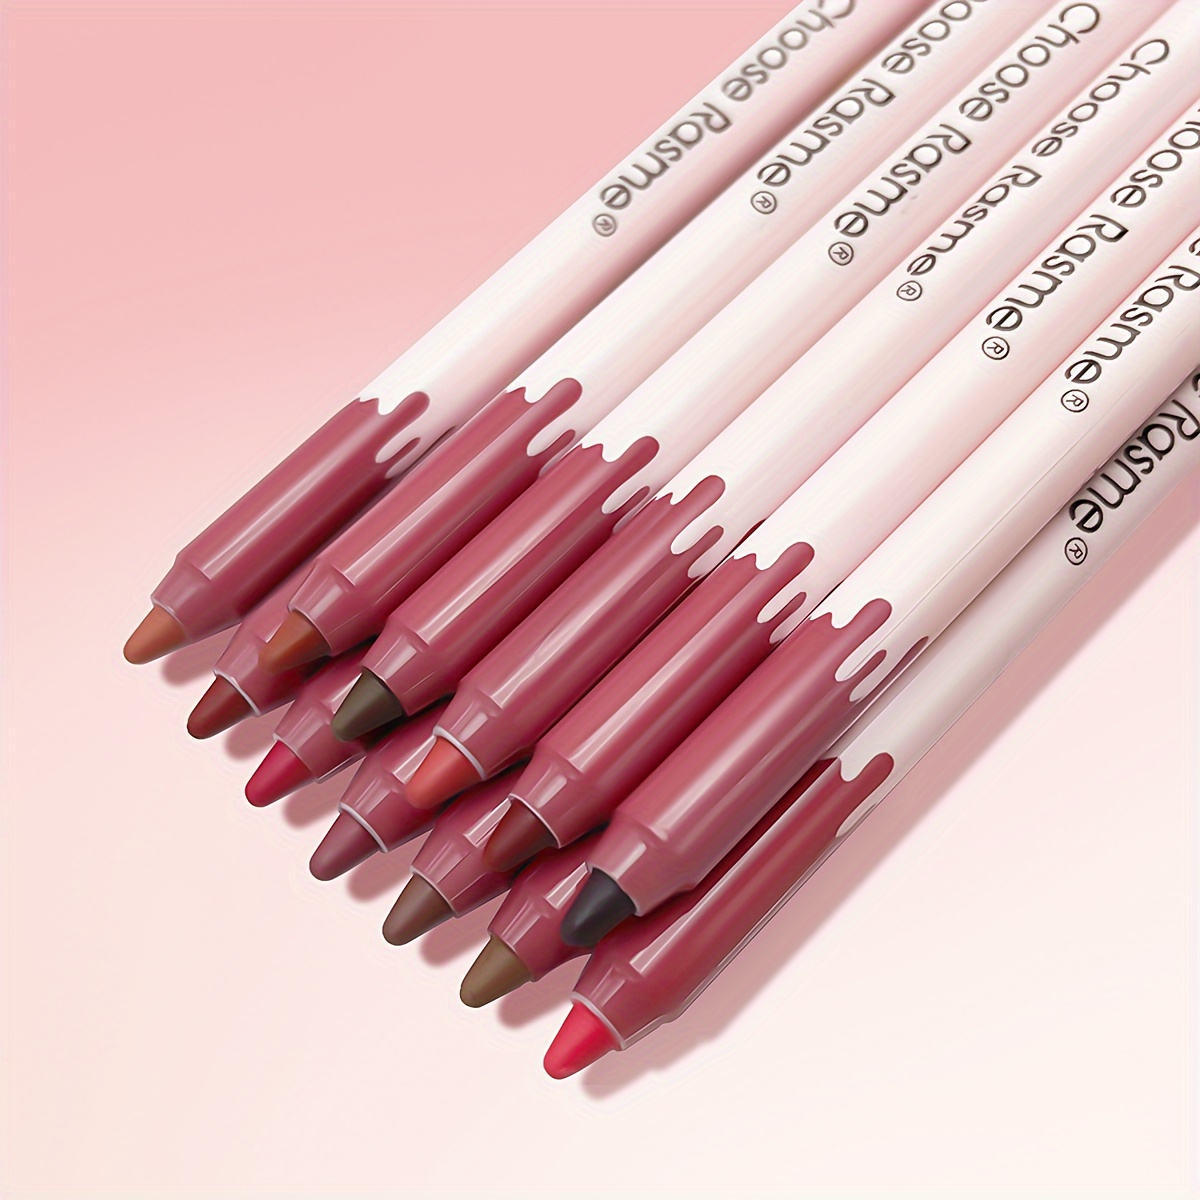 

radiant Pink" 12-piece Lip Liner Set - Creamy Pink & Red Shades, Natural Look, All Skin Types Compatible